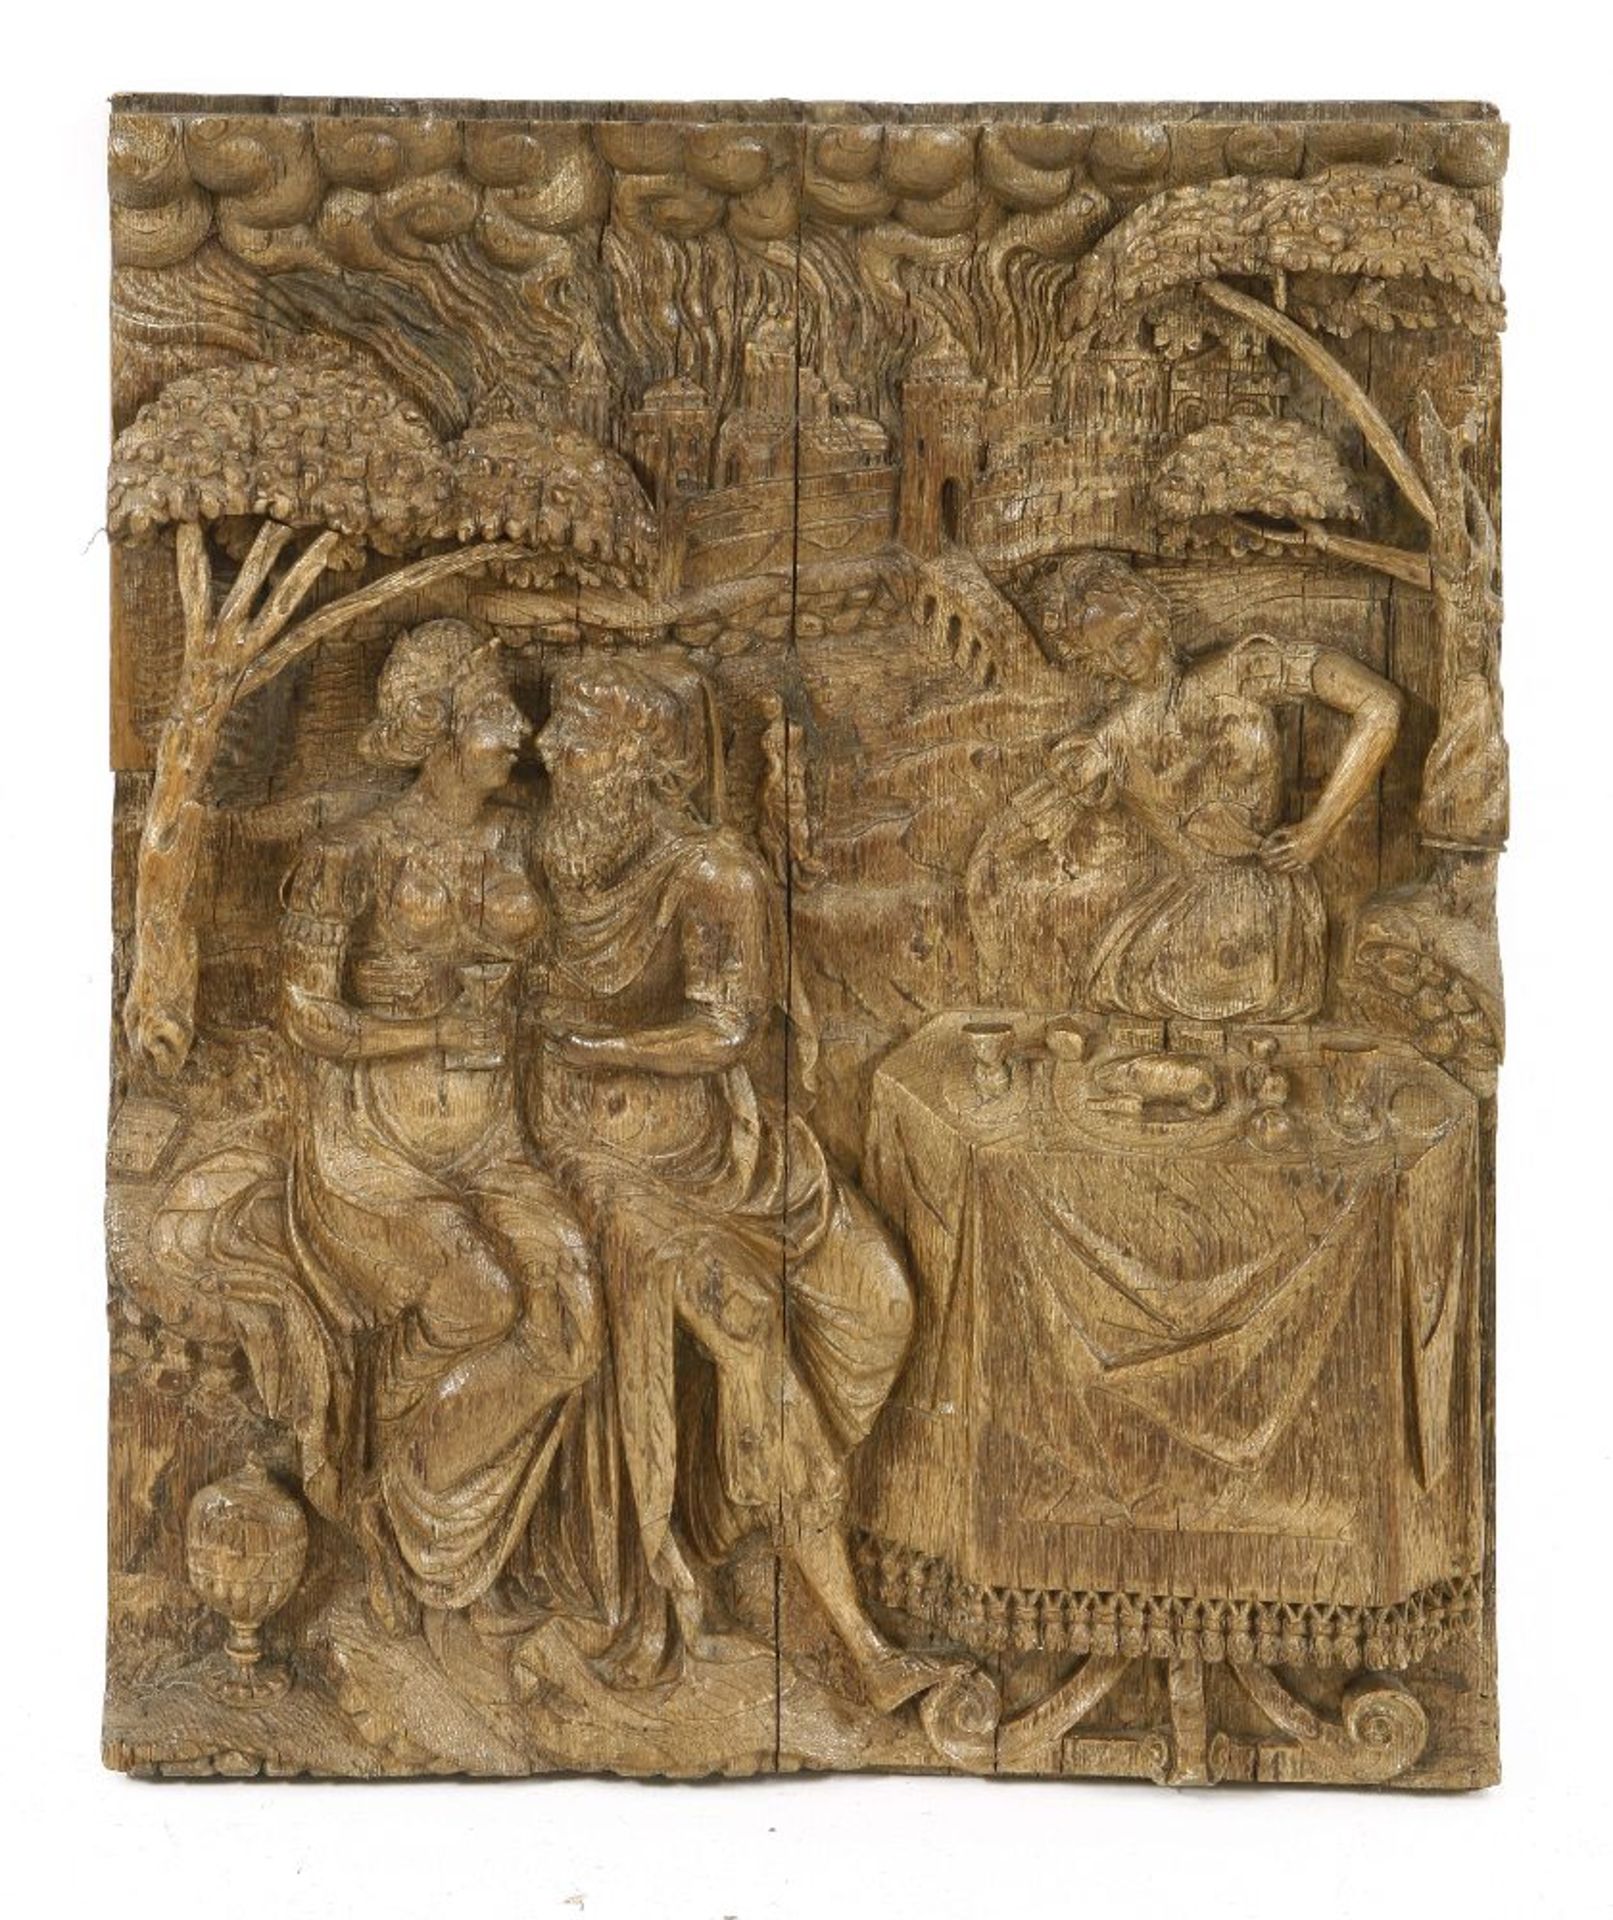 An oak panel,17th century, probably Flemish, carved in relief with Lot and his daughters in the